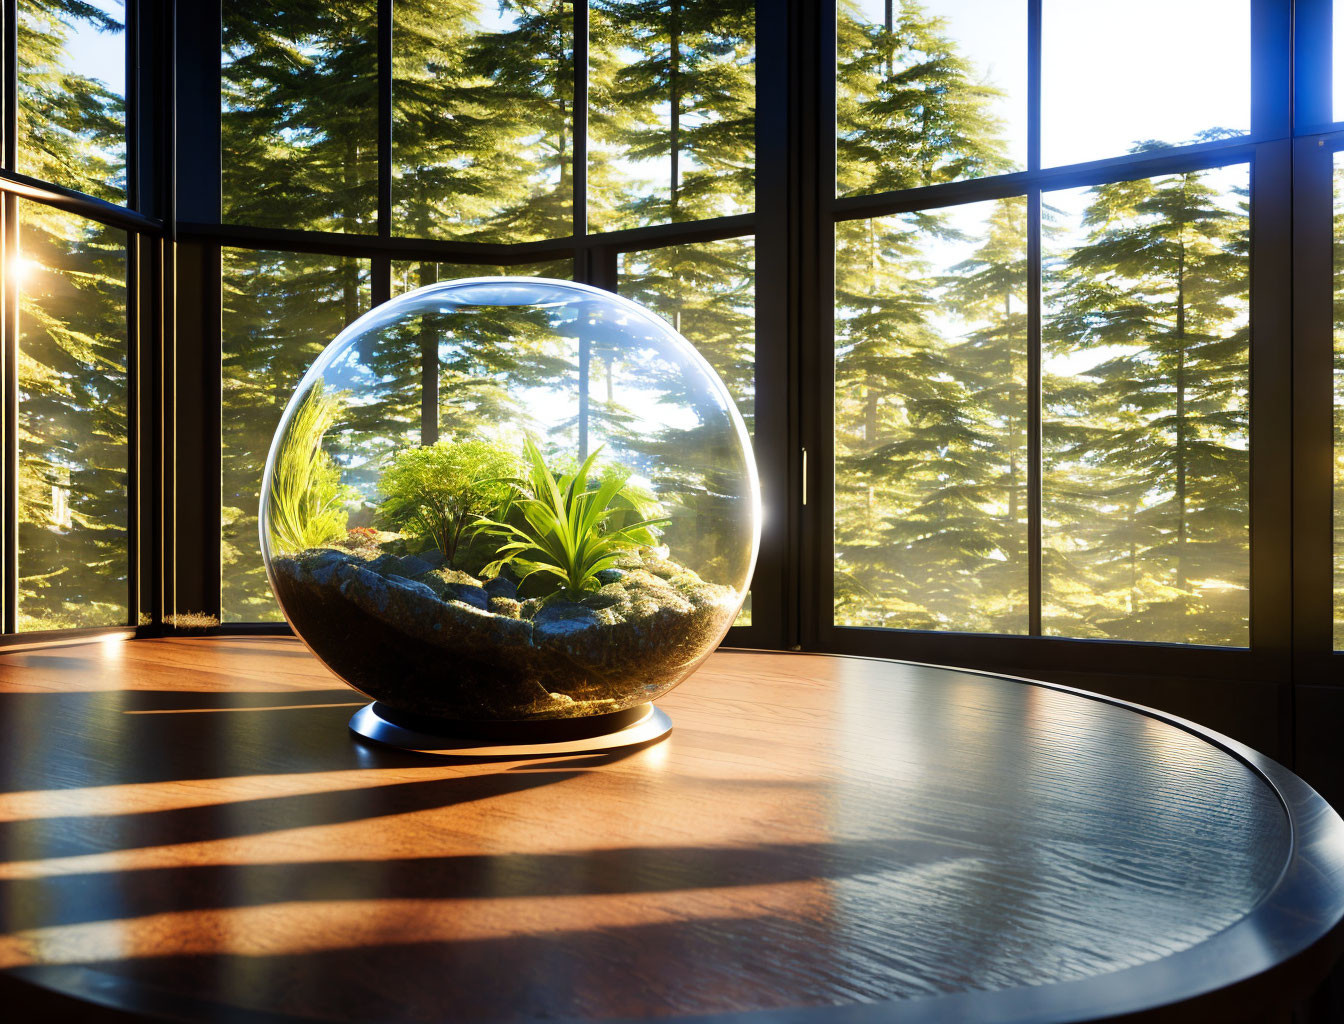 Lush Greenery Terrarium on Round Table by Sunlit Forest View